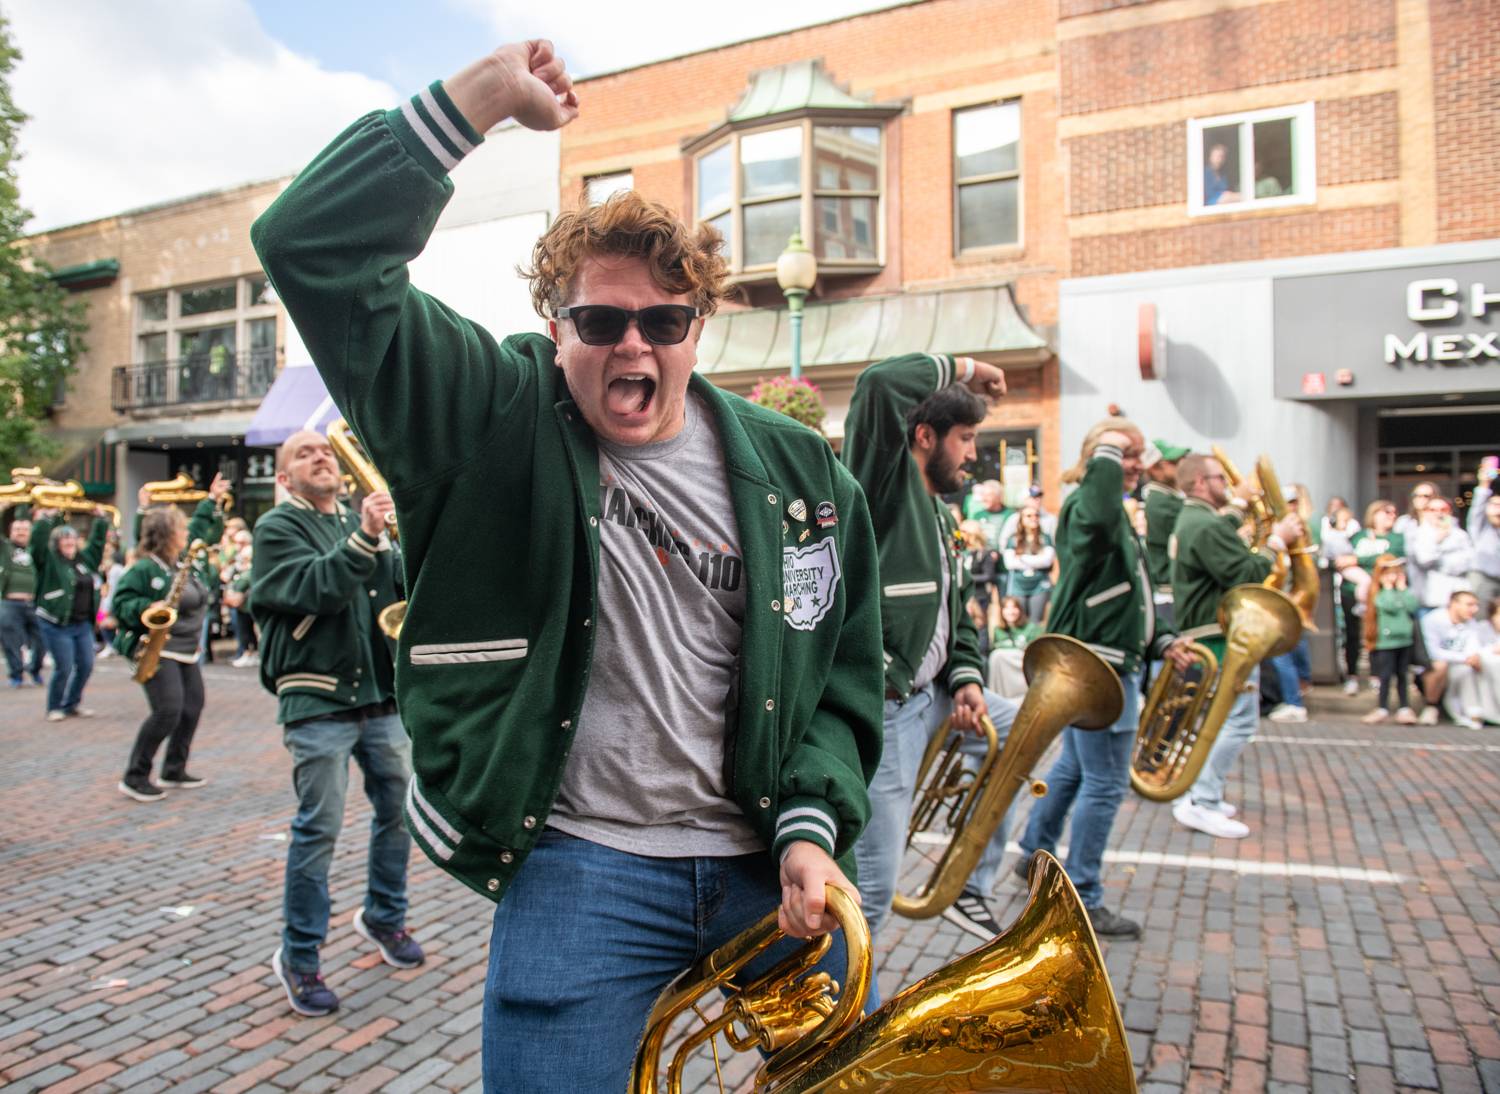 A member of the Marching 110 Alumni Band is amped to be back performing at the Homecoming Parade on Court Street.